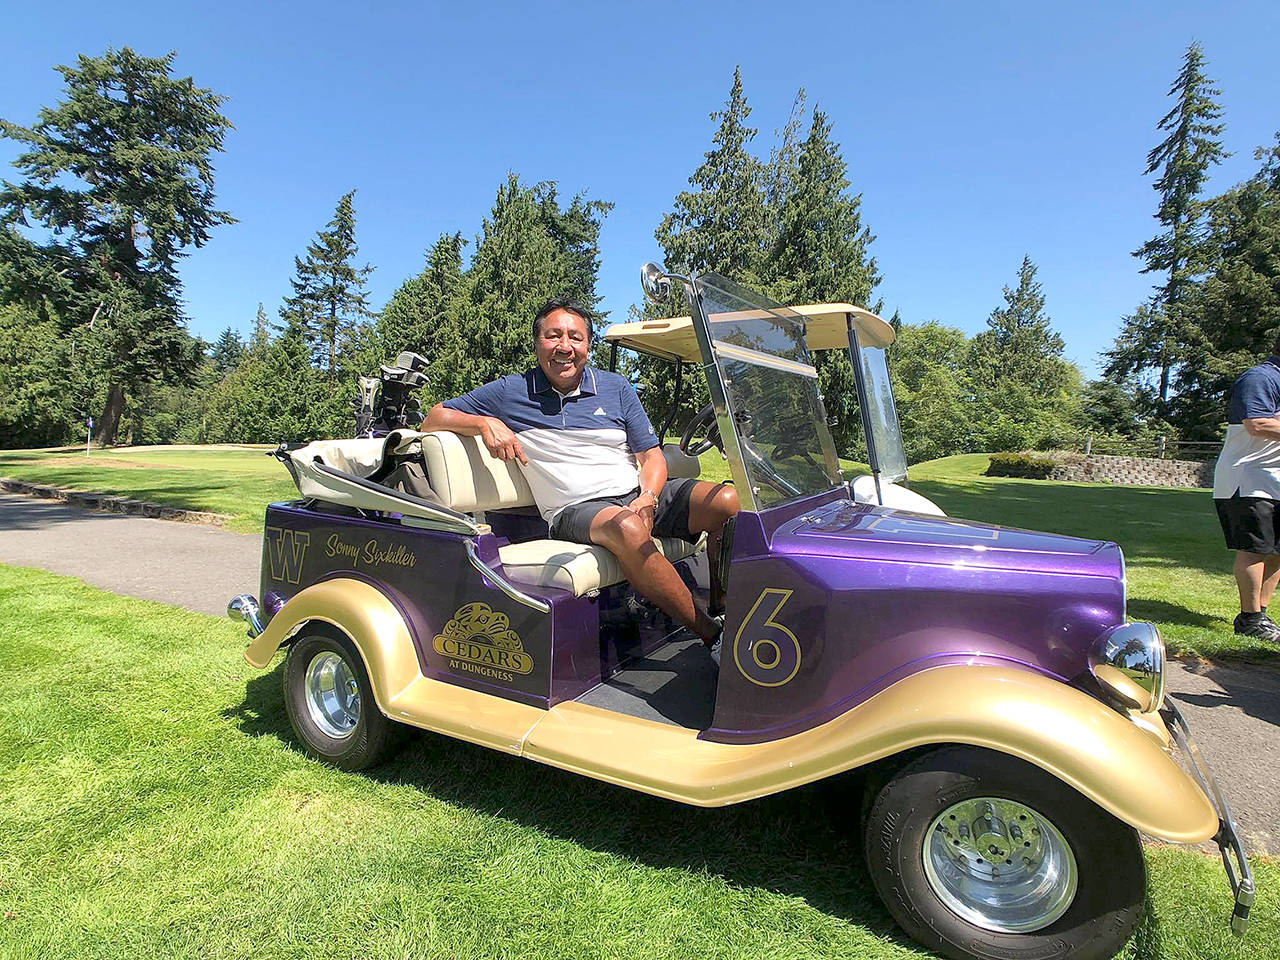 Cedars at Dungeness Washington football legend Sonny Sixkiller sits in a customized UW Football golf cart before the eighth annual Sonny Sixkiller Celebrity Golf Classic in July. The golf cart was among around 50 carts destroyed in a fire at Cedars at Dungeness on Sunday morning.